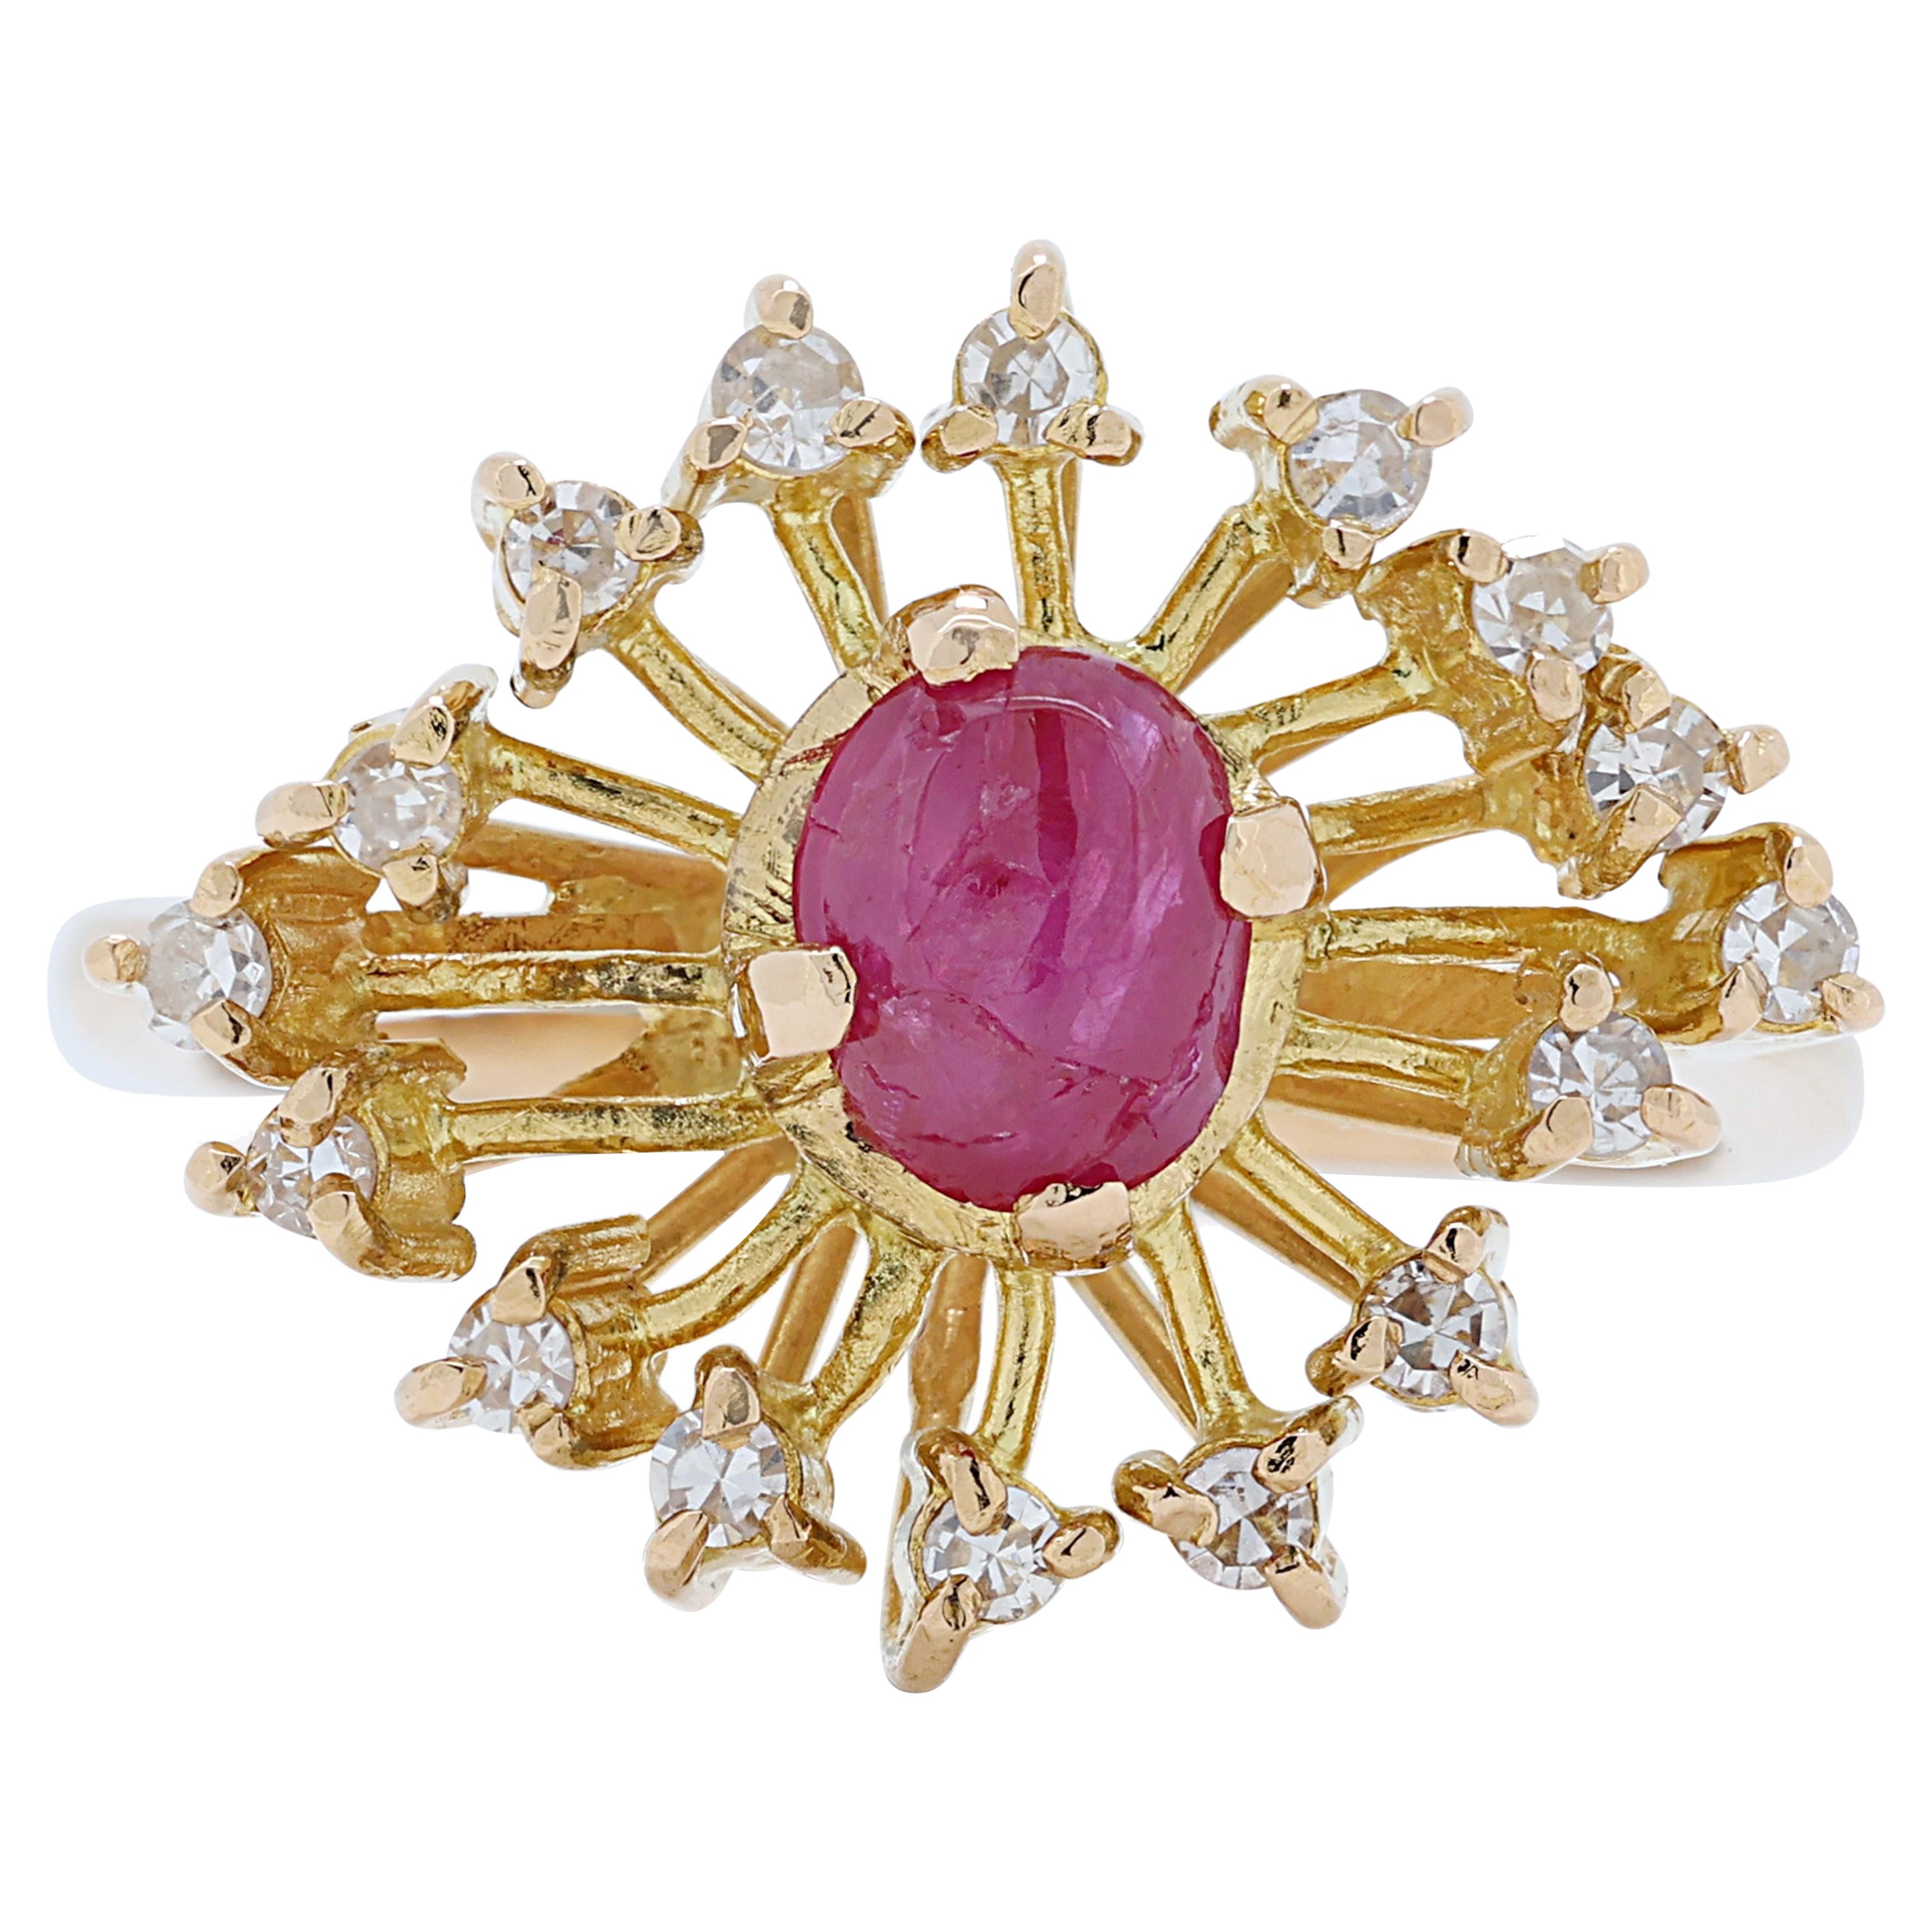 Captivating 0.45ct Tourmaline Cluster Ring in 22K Yellow Gold with Diamonds For Sale